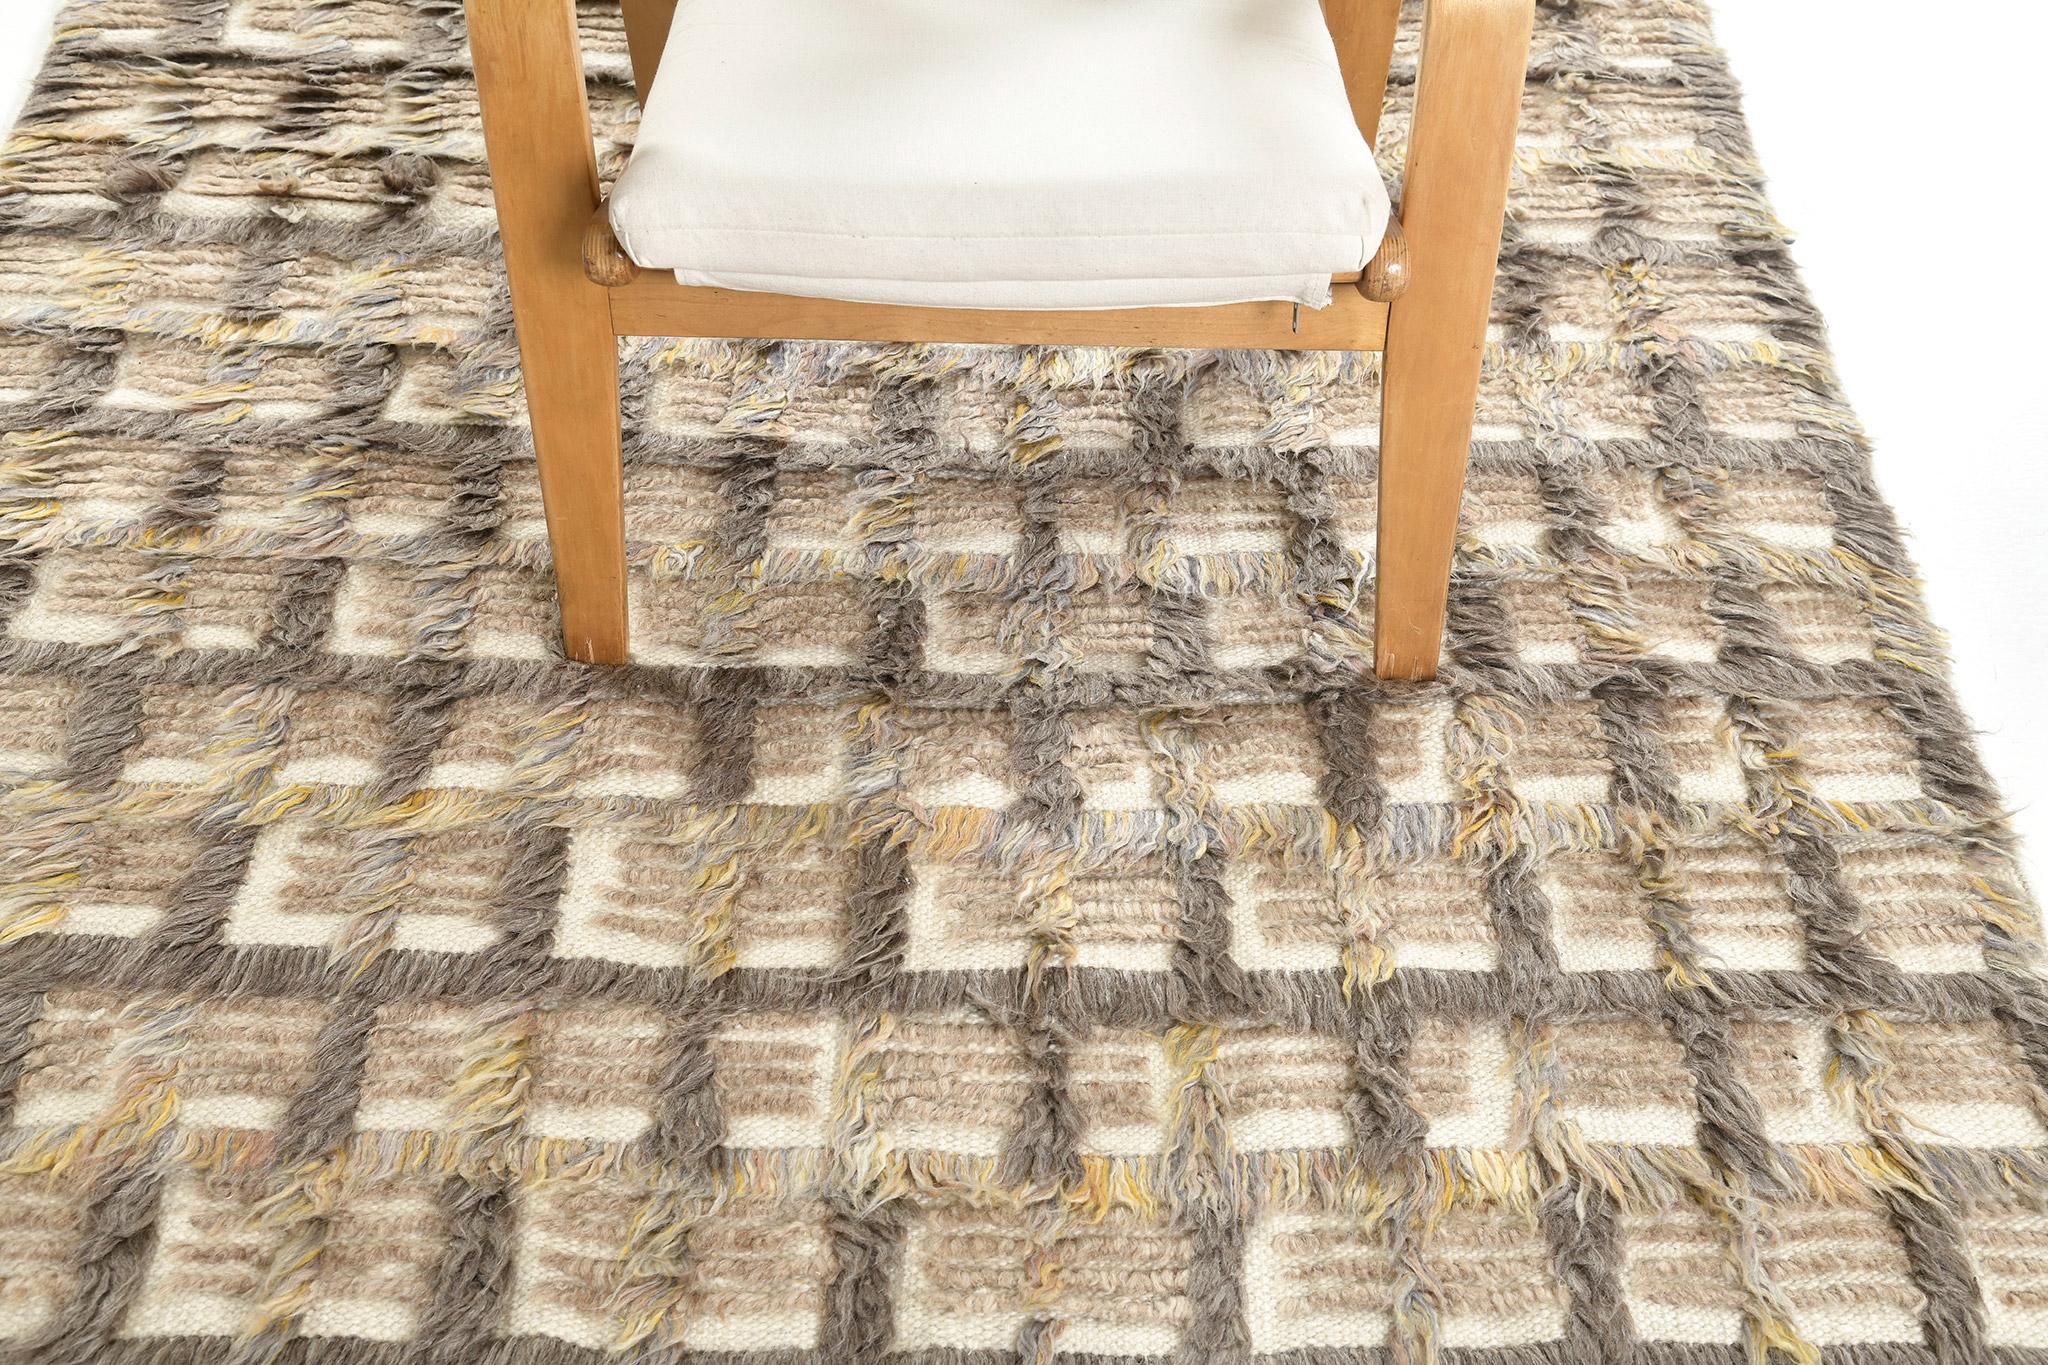 The Hanin rug is a complex multi-toned grid motif in long pile lines with shapes of trim pile, and open flatweave accents. Texturally rich with tonal dimensional effects, Hanin is rendered in a warm mix of cacao, clay and gold inflected mixed gray